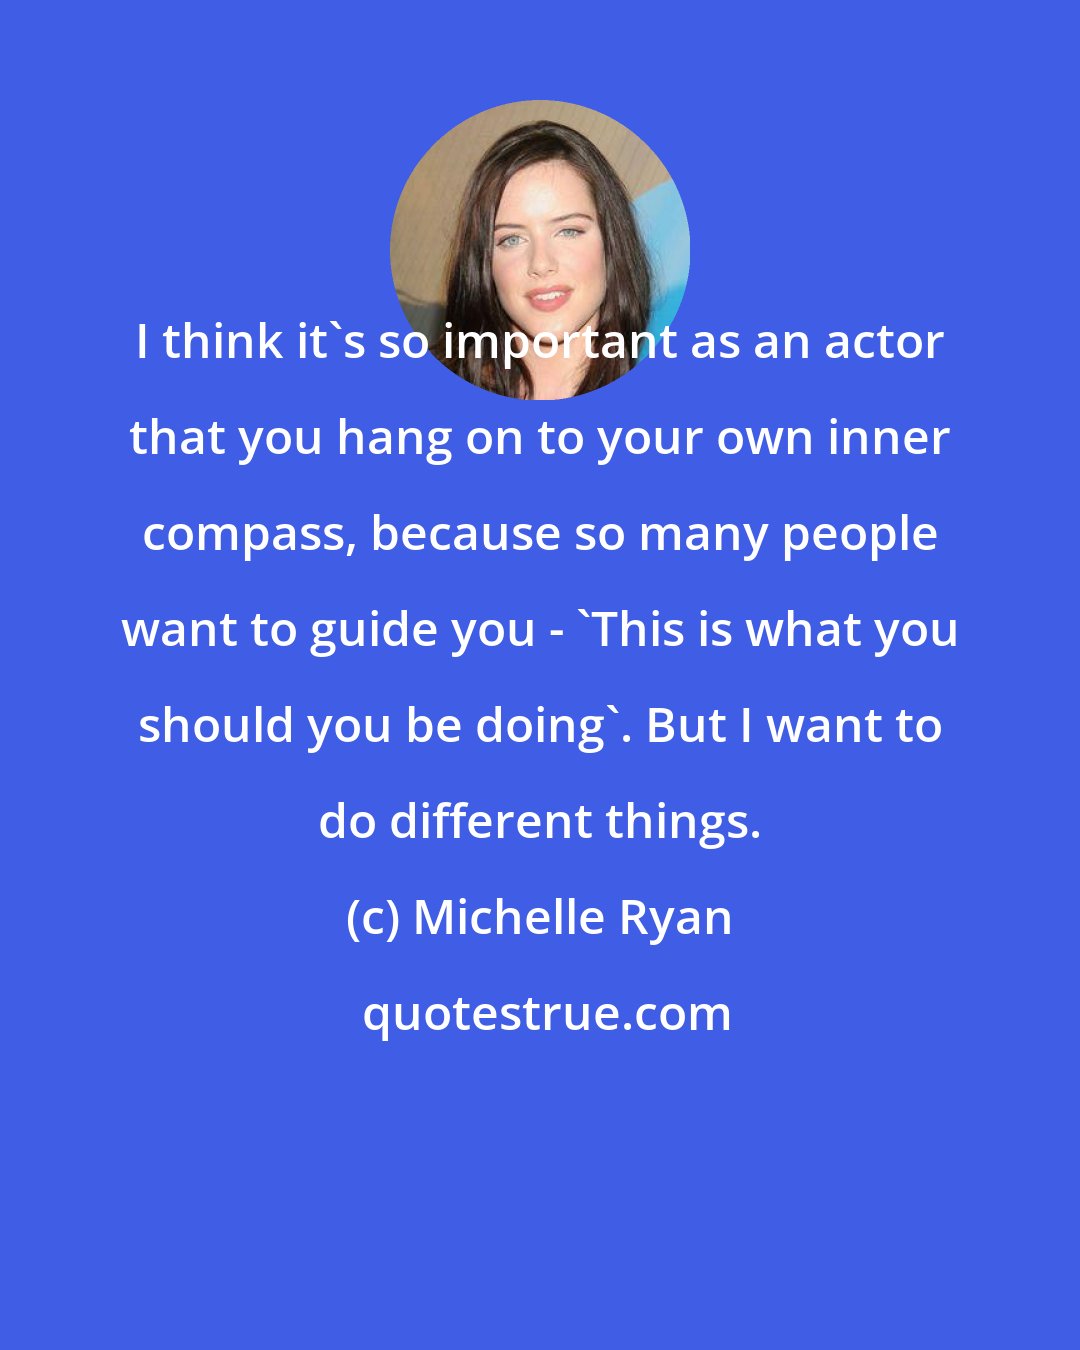 Michelle Ryan: I think it's so important as an actor that you hang on to your own inner compass, because so many people want to guide you - 'This is what you should you be doing'. But I want to do different things.